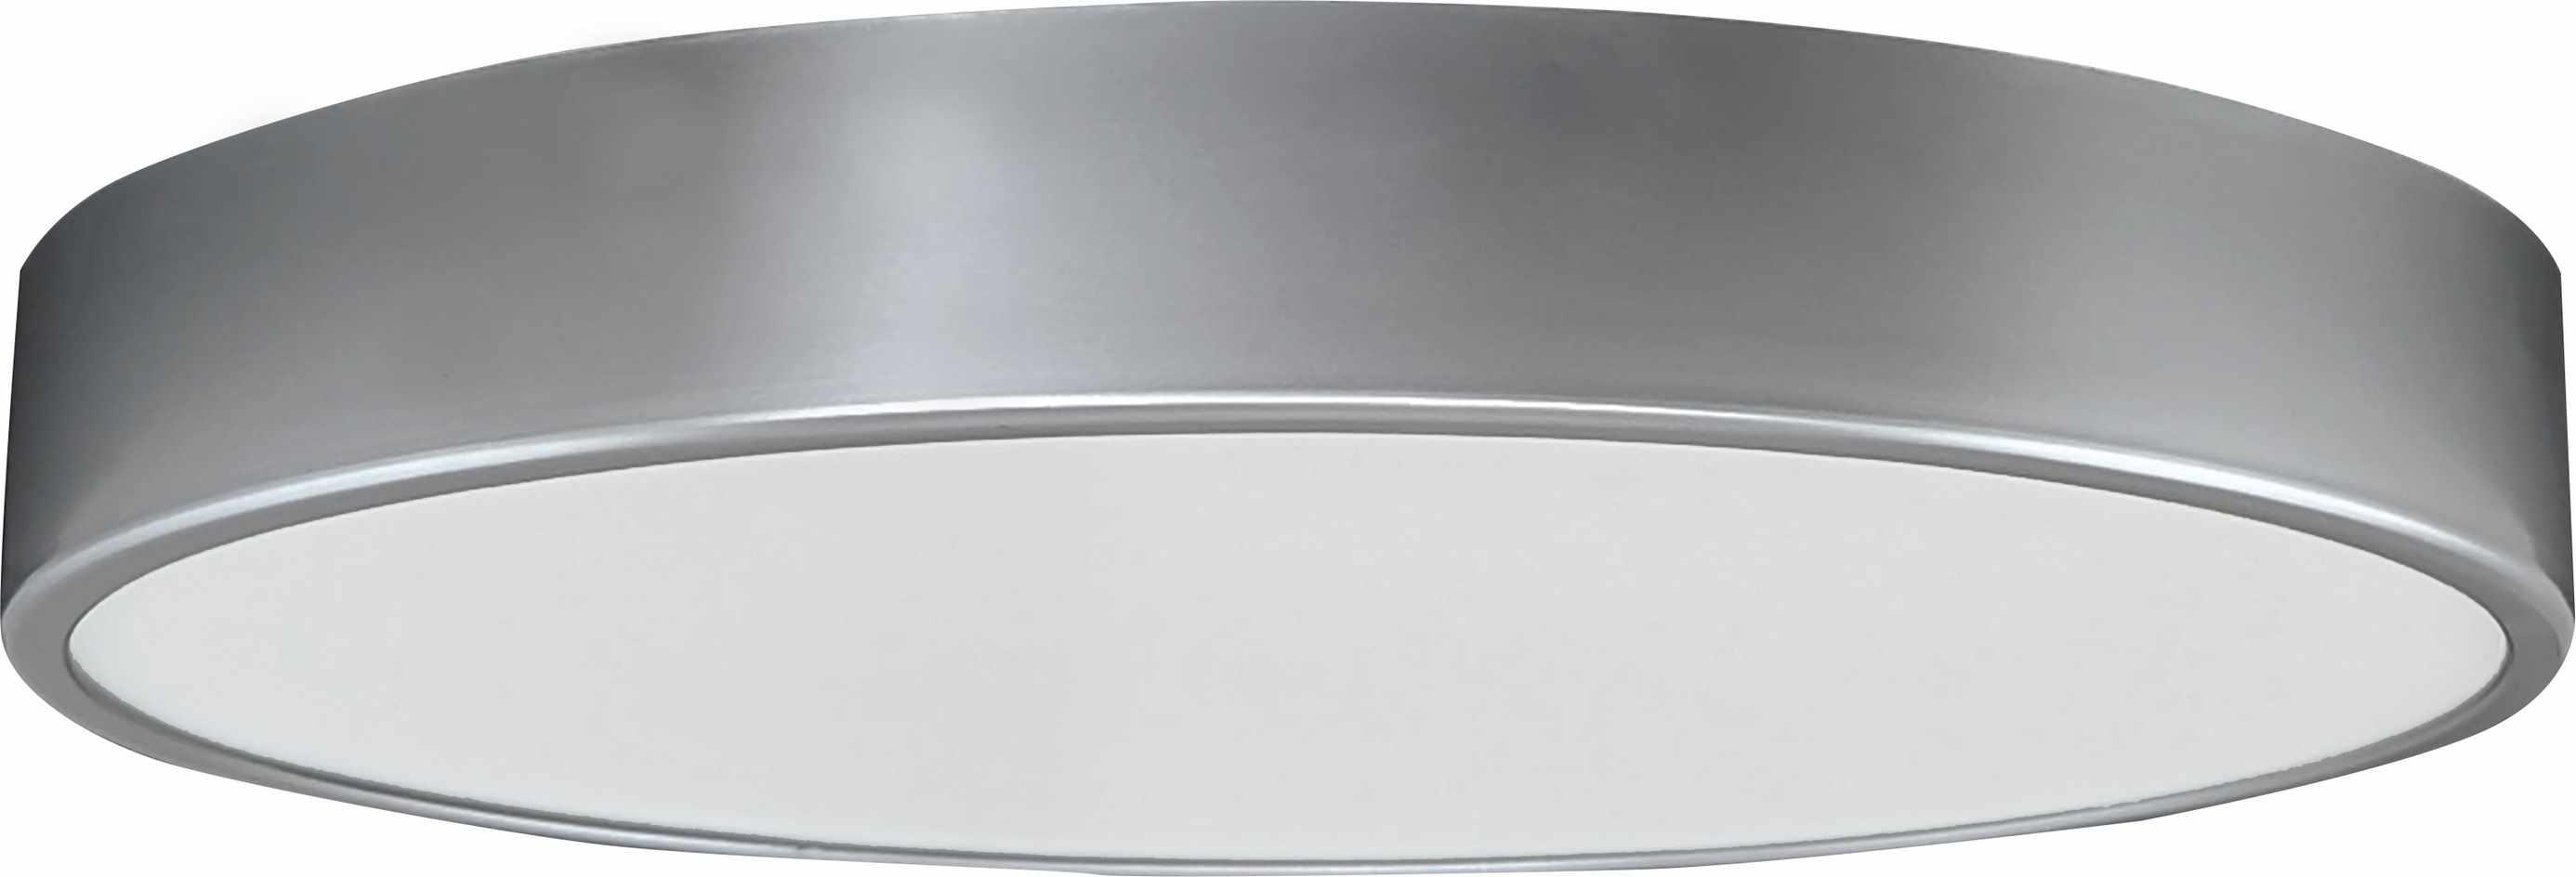 Greenlux LED TAURUS-R Silver 12W NW GXPS031 GXPS031